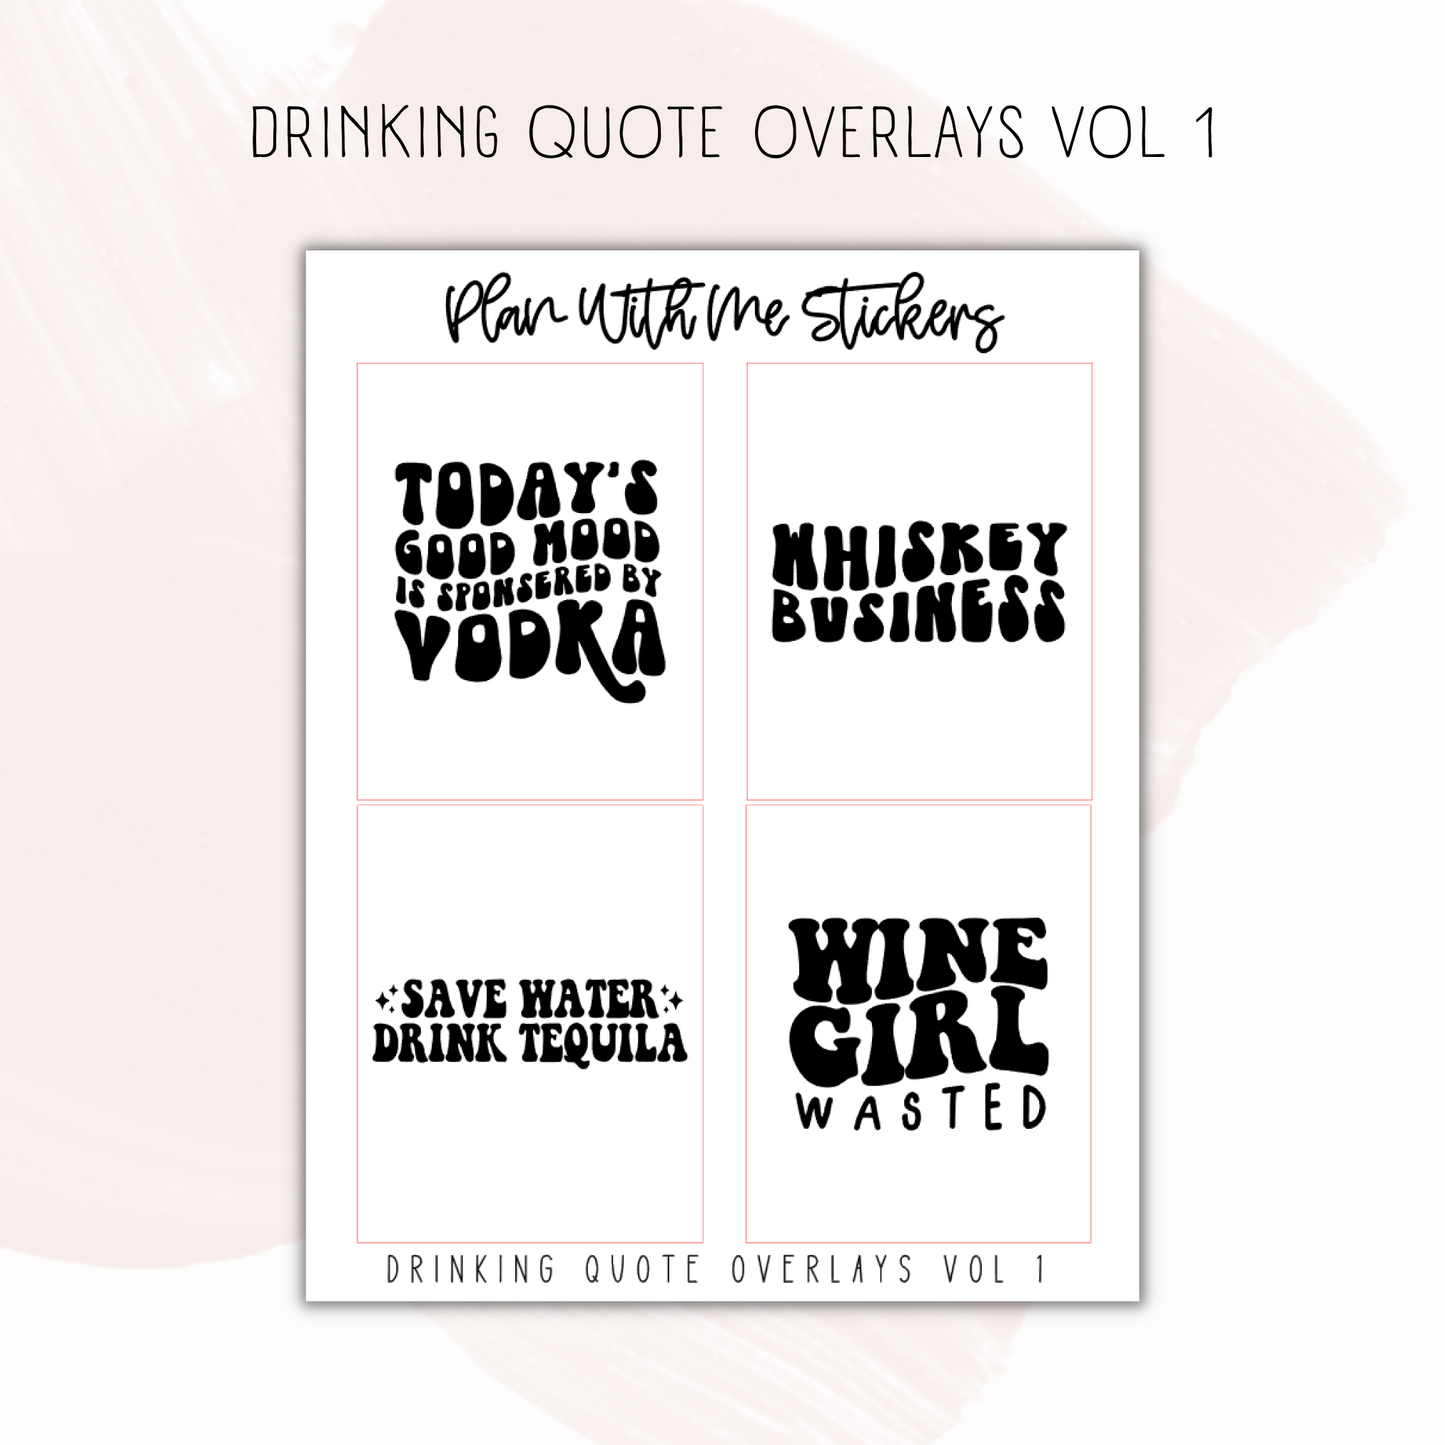 Drinking Quote Overlays Vol 1